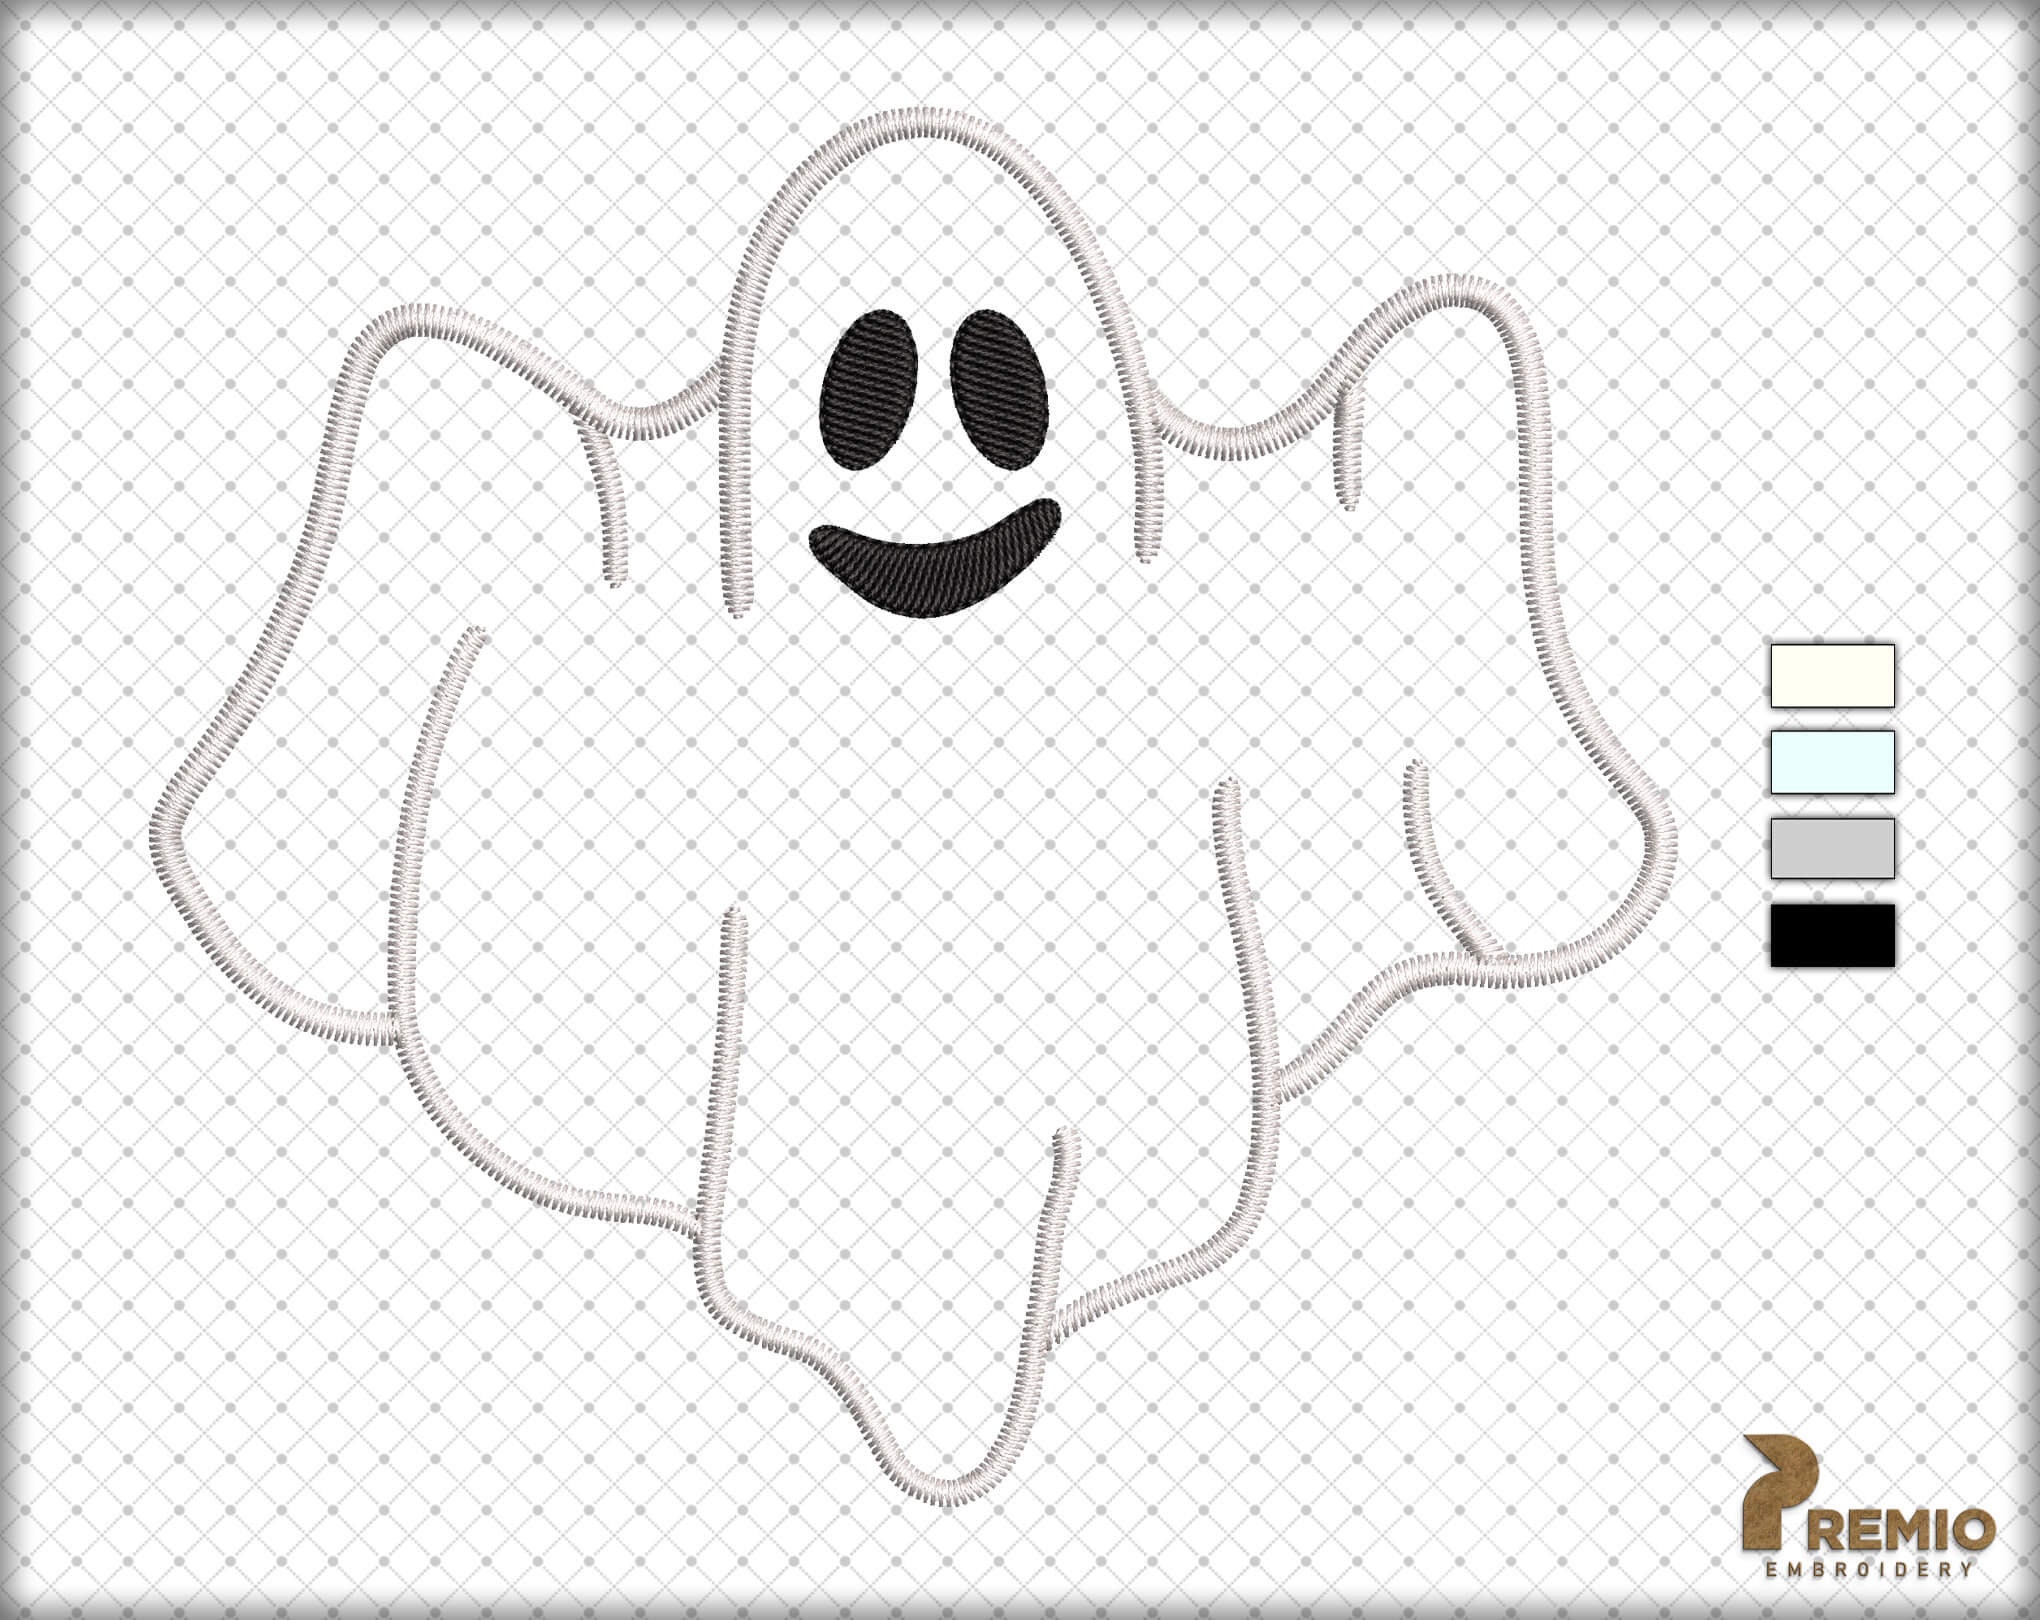 Scary Face Embroidery Design File, Machine Embroidery design - Inspire  Uplift